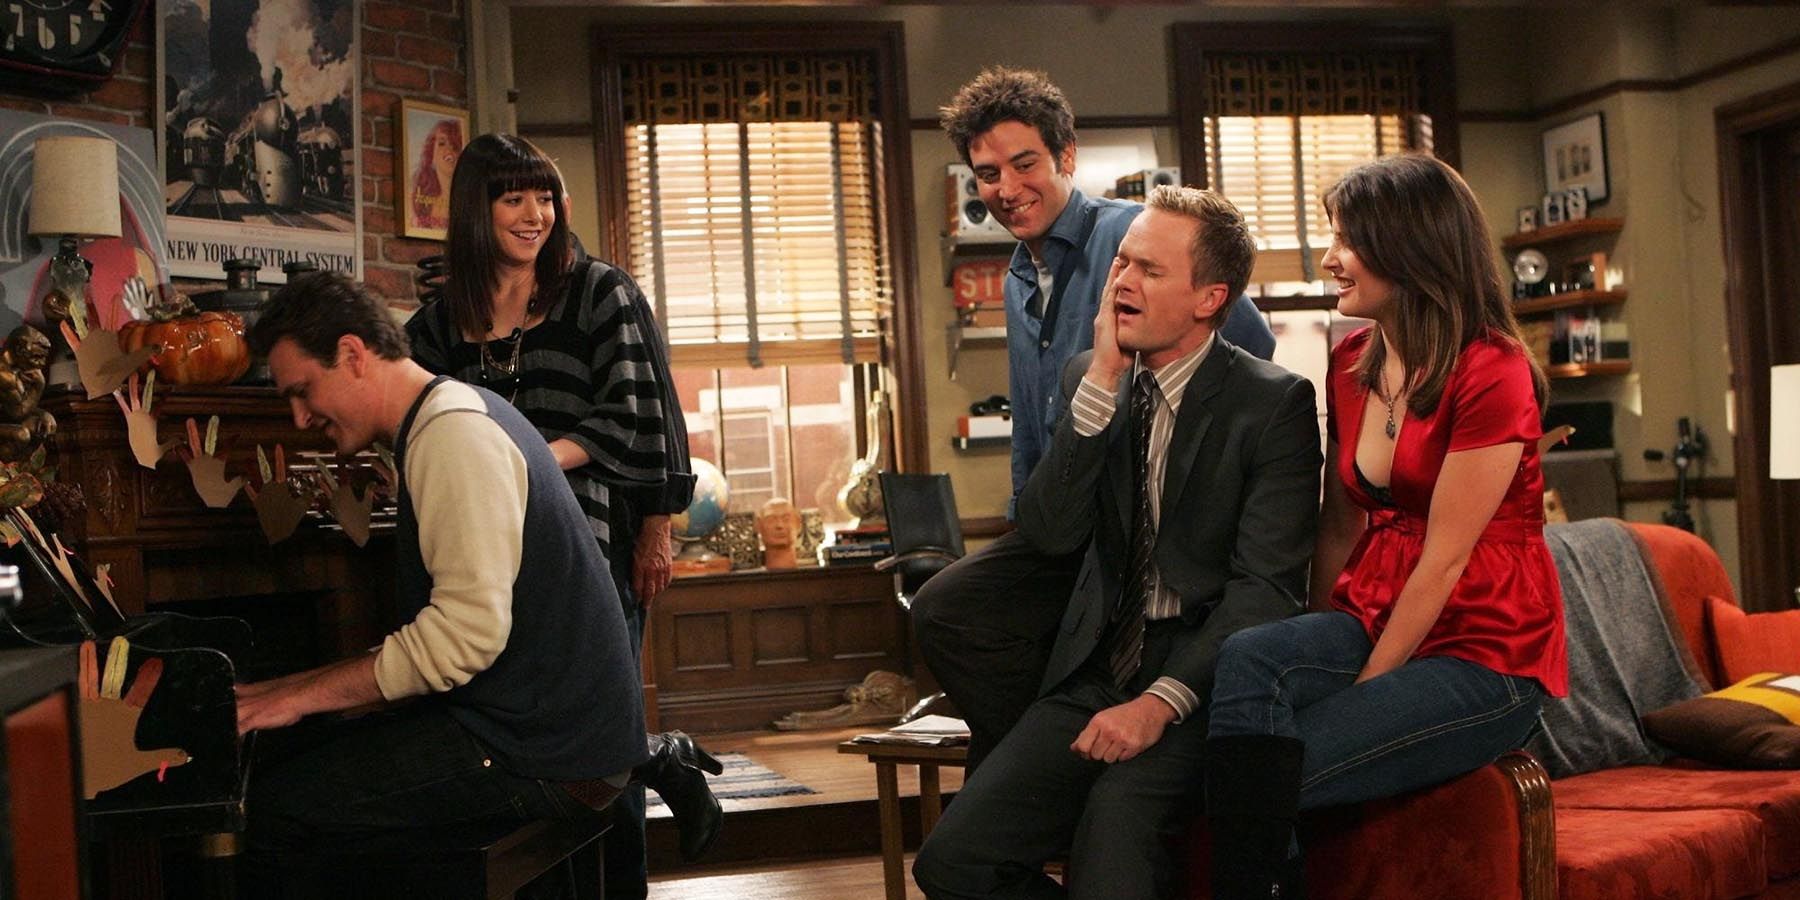 Marshall plays piano for the gang as Barney holds his face in pain